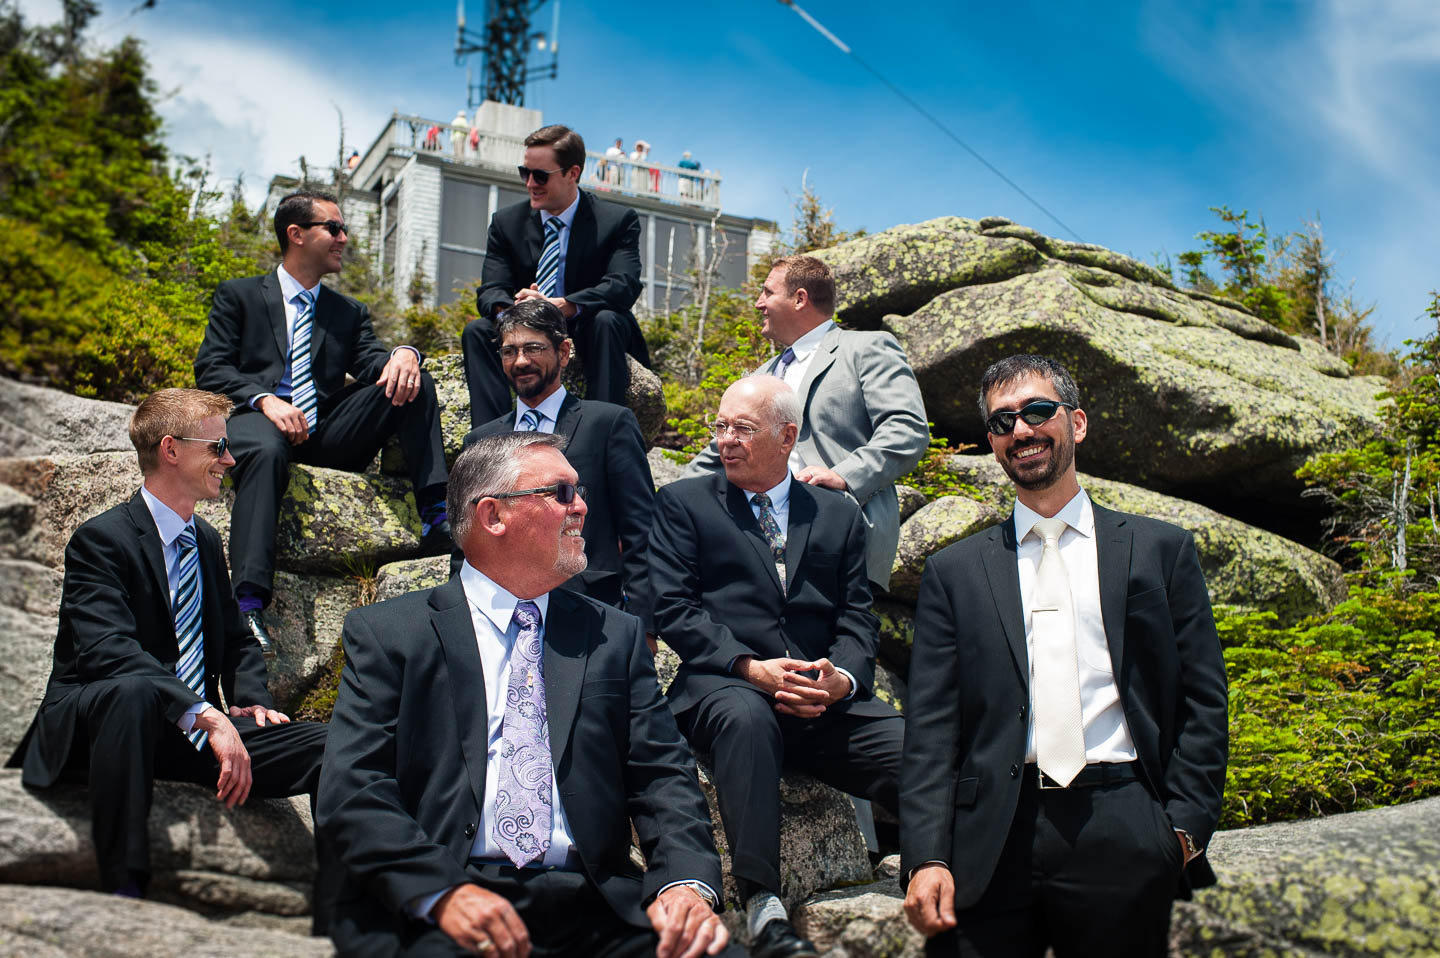 Groom and groomsmen hike in suits for a pre wedding portrait session with amazing views